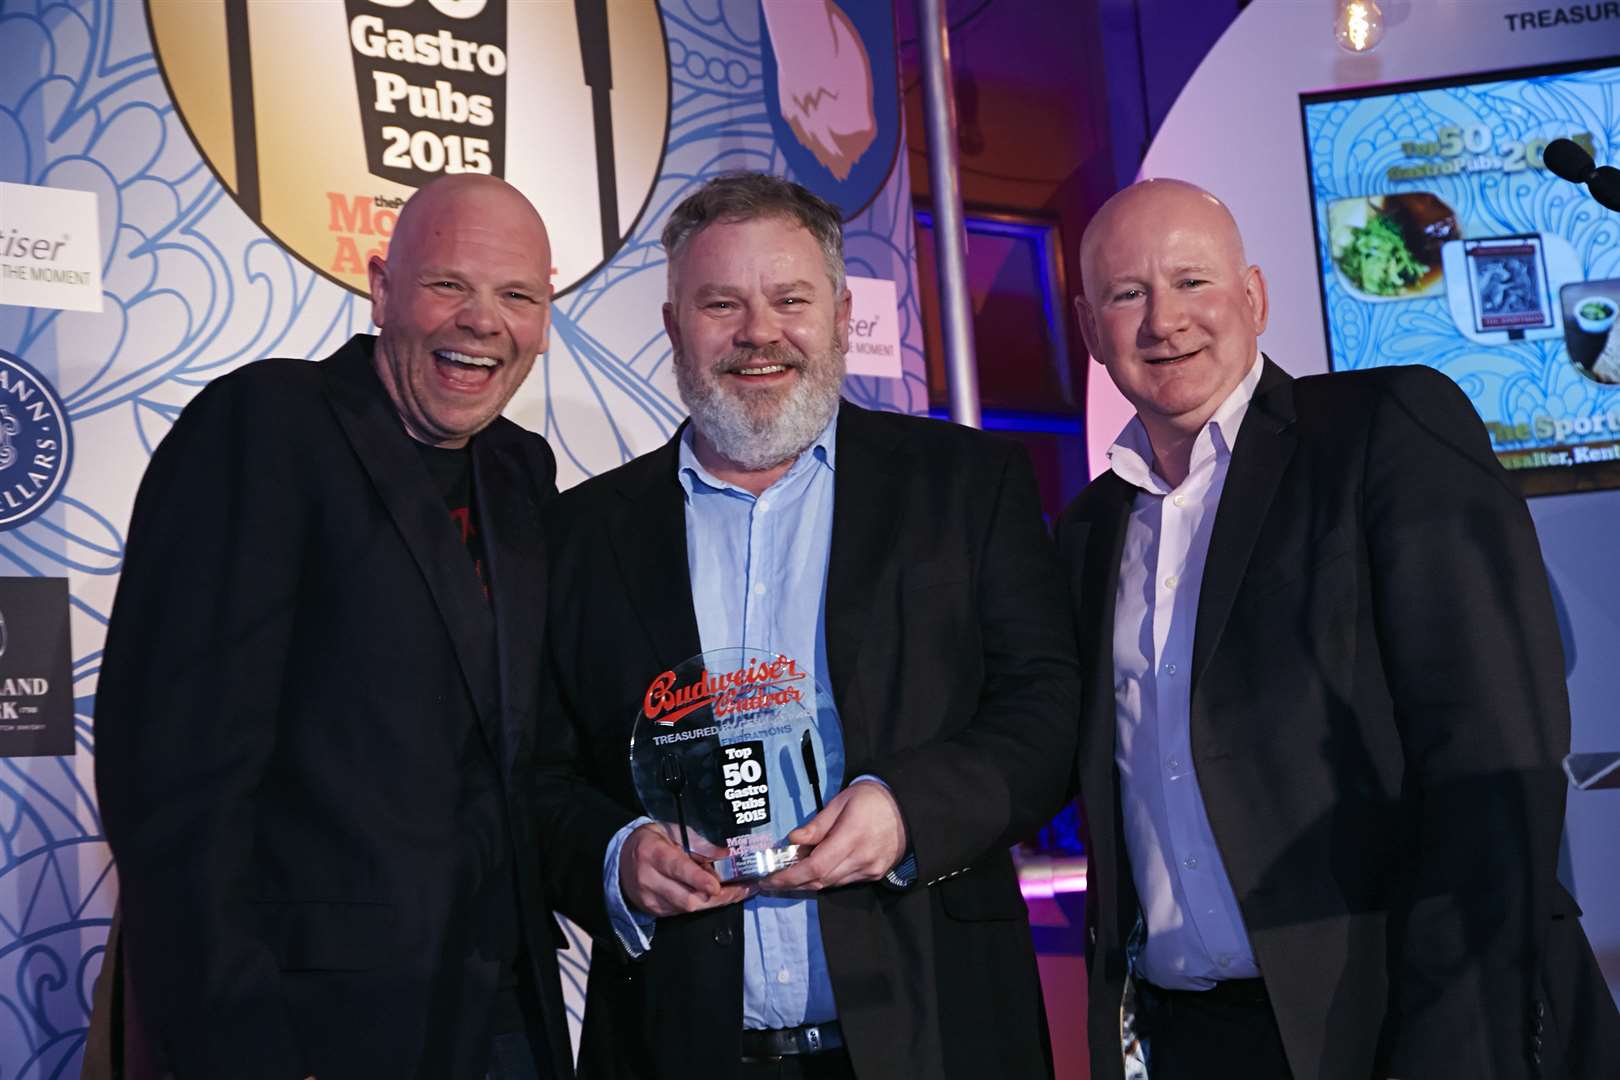 Celebrity chef Tom Kerridge, left, presents the Sportsman in Seasalter with the award for being named Britain's best gastropub